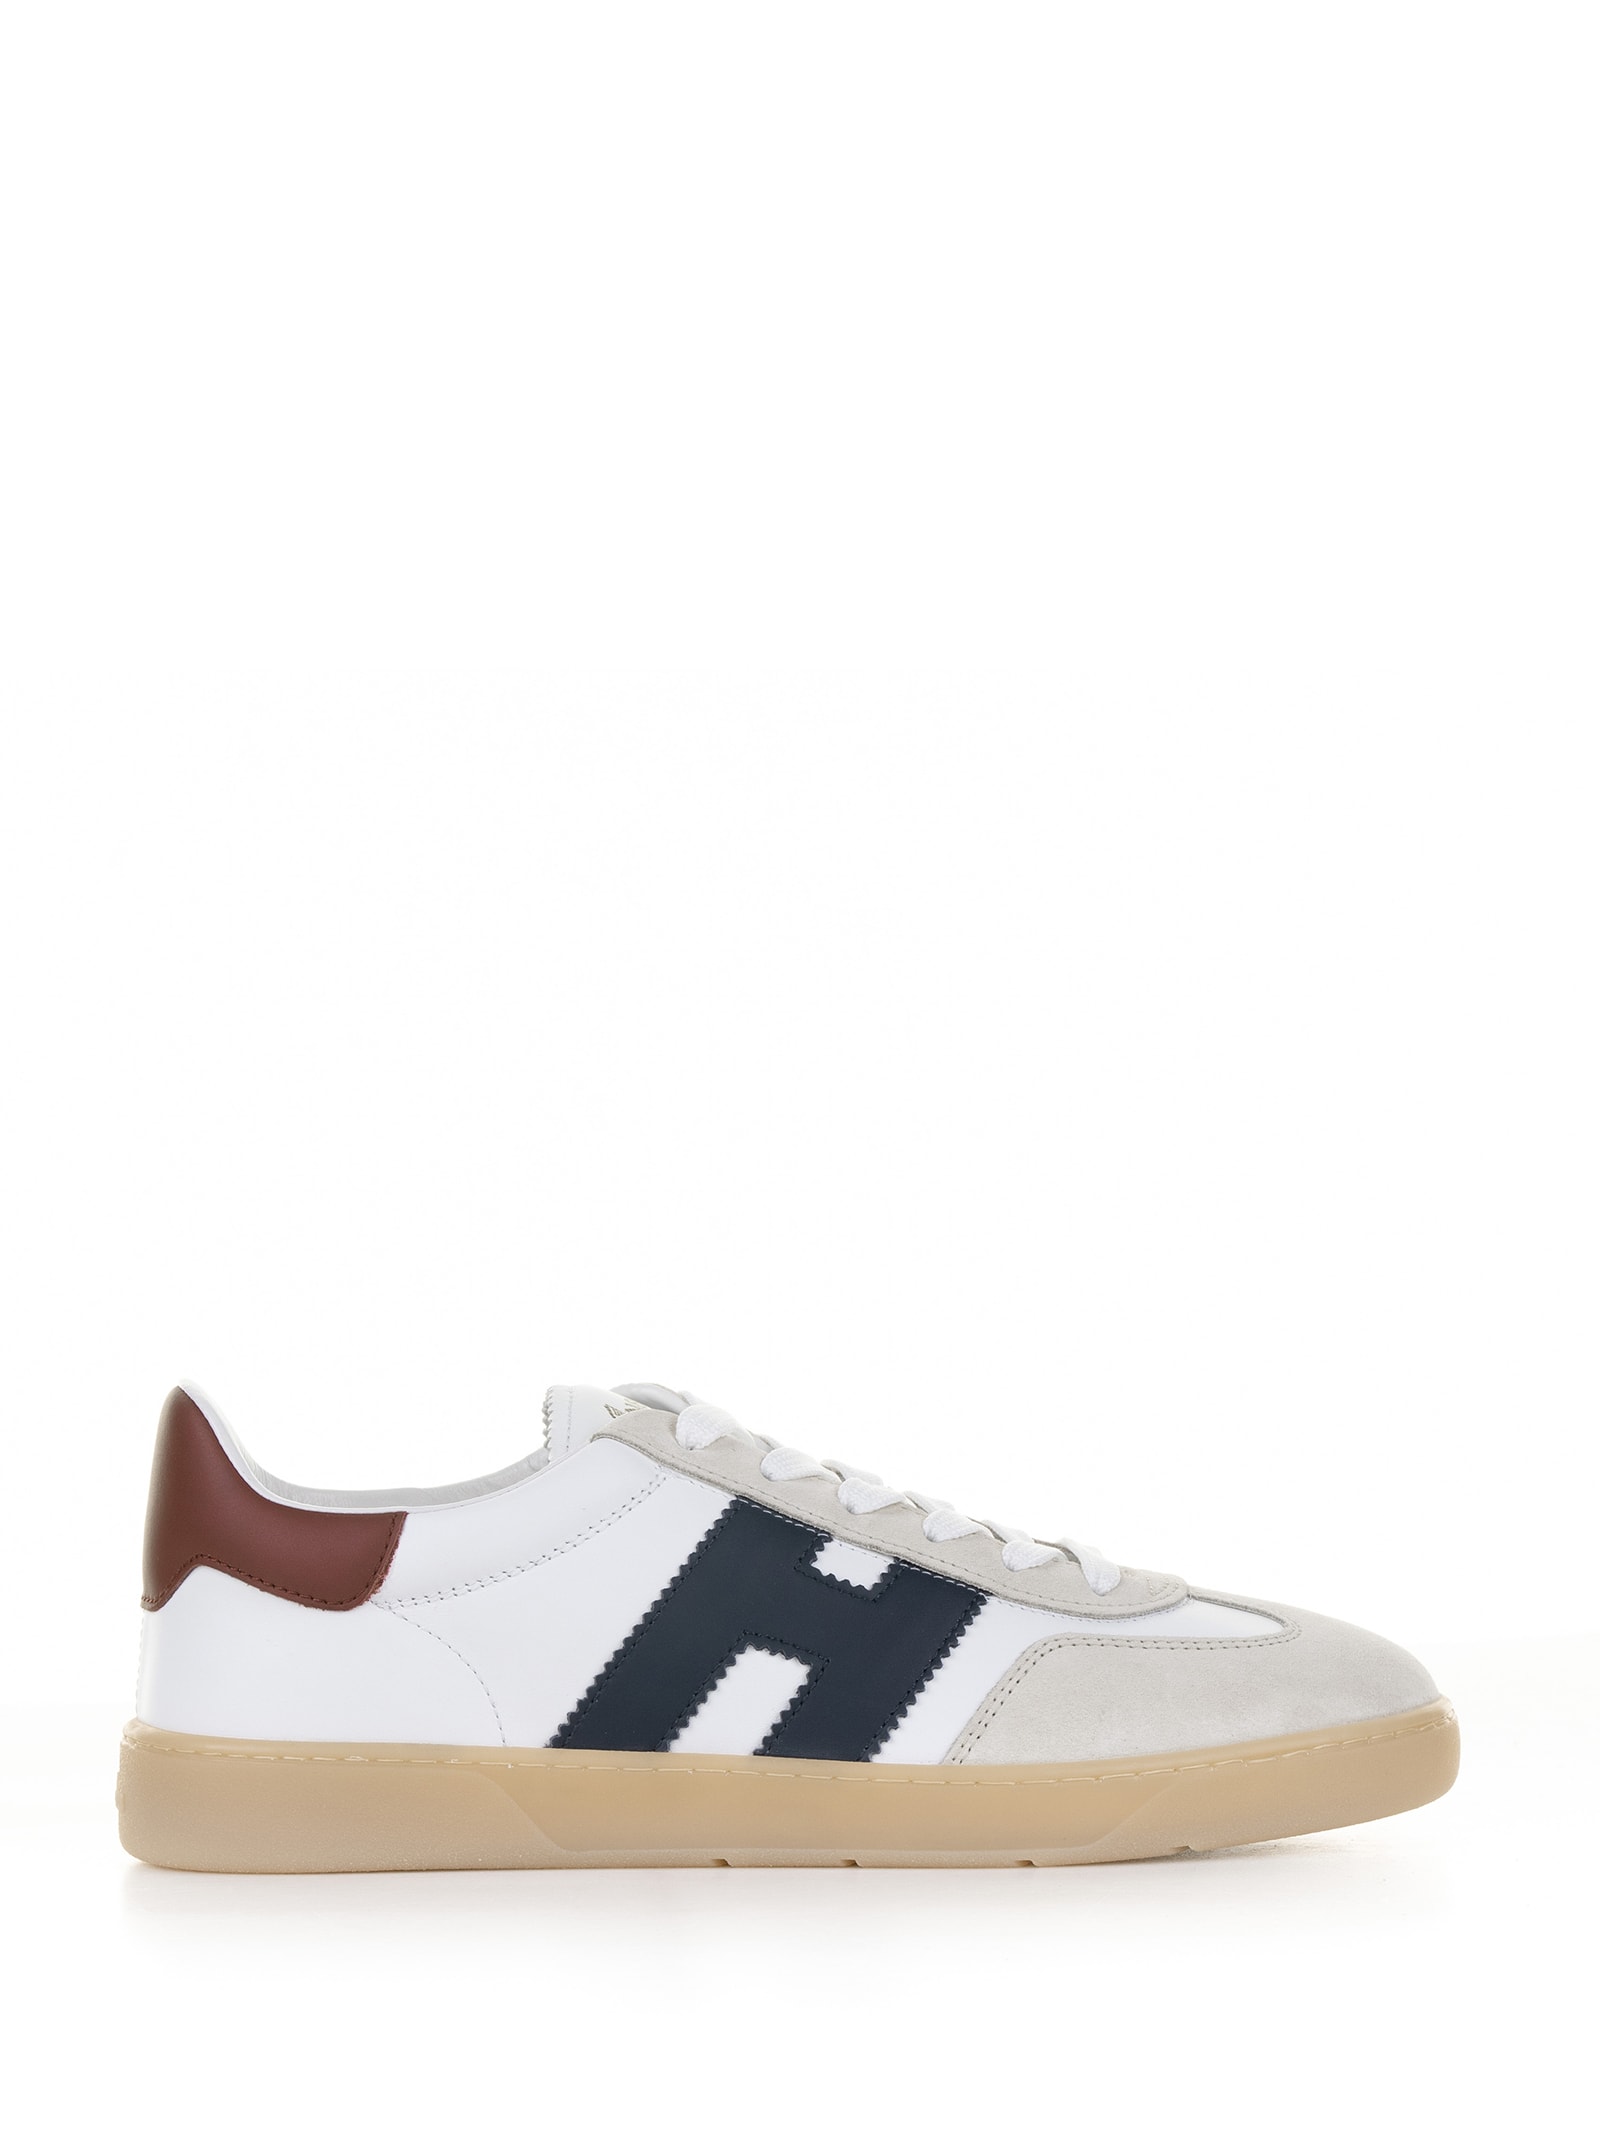 Hogan Cool Trainers In Leather And Suede In Bianco Blu Rosso